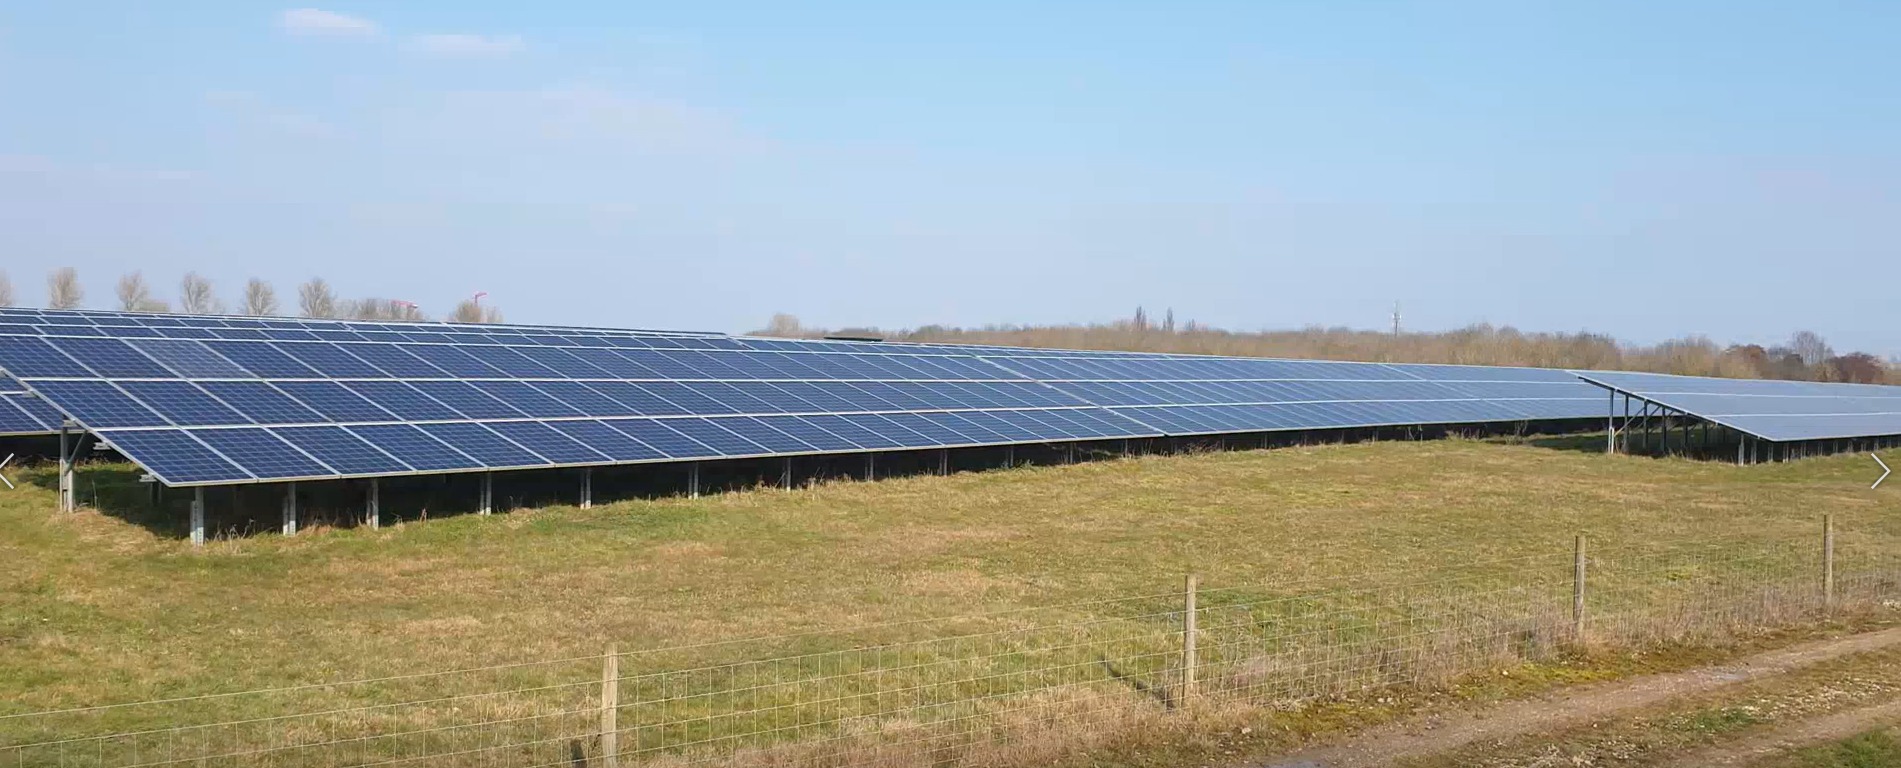 The West Berkshire Solar Farm in Burghfield Common. Barkham Farms will look much like this if the solar farm plan is given the go ahead. Credit: UGC